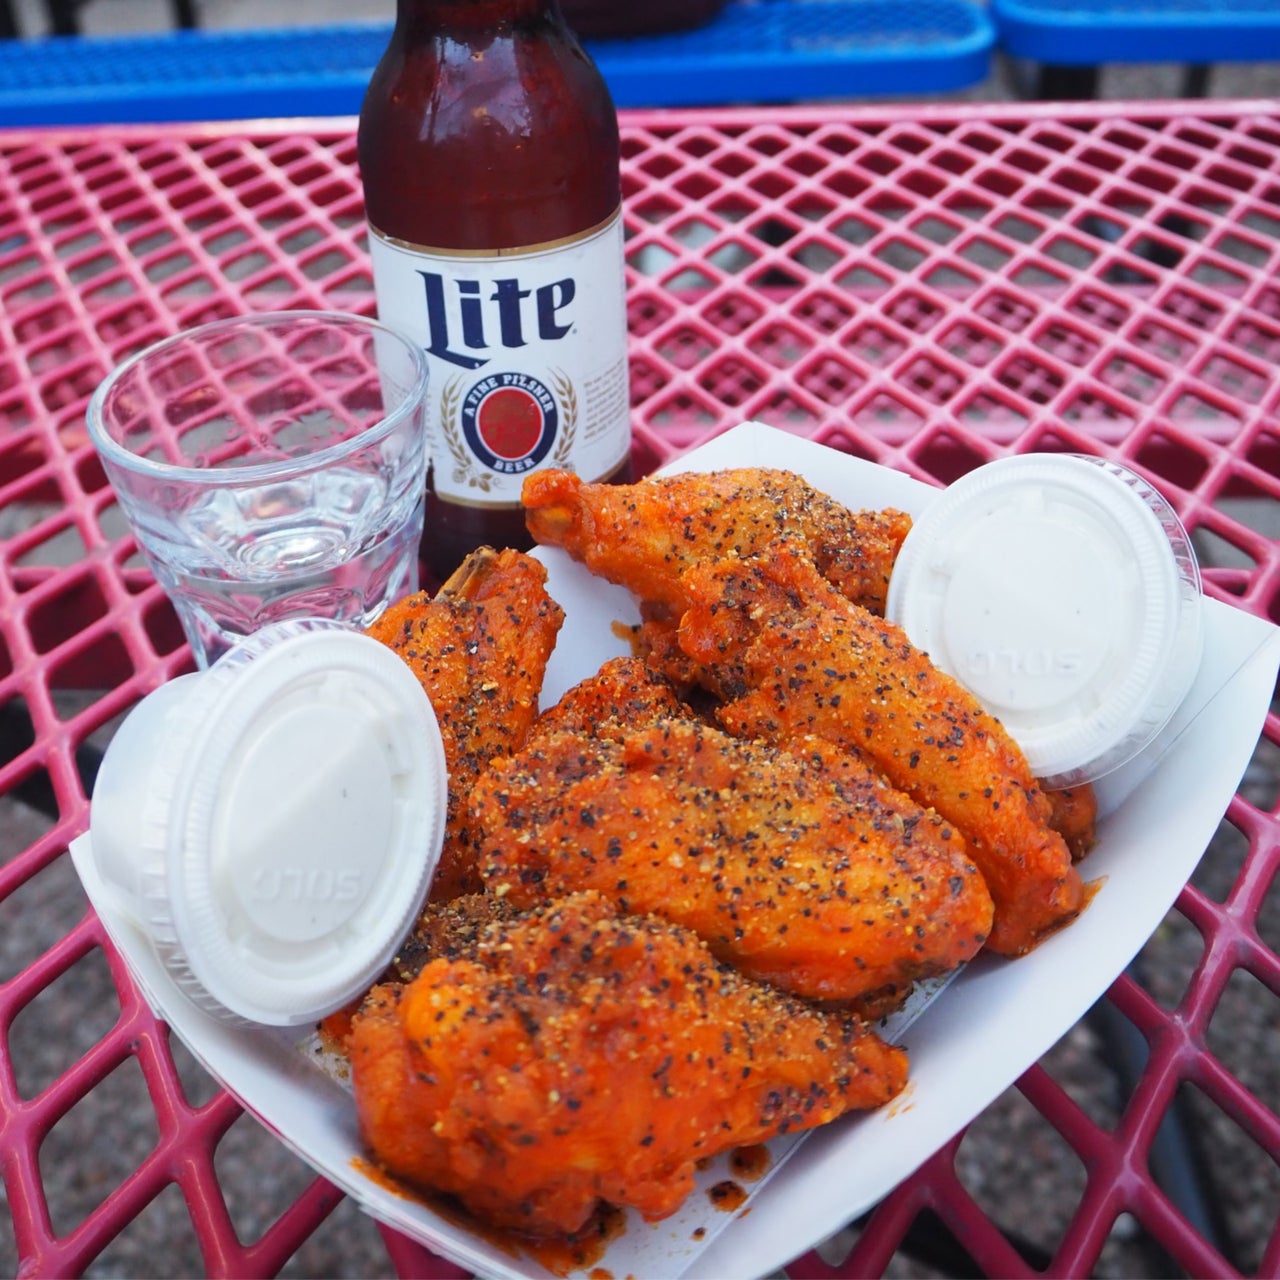 A plate of chicken wings on an outdoor pink-wire table.